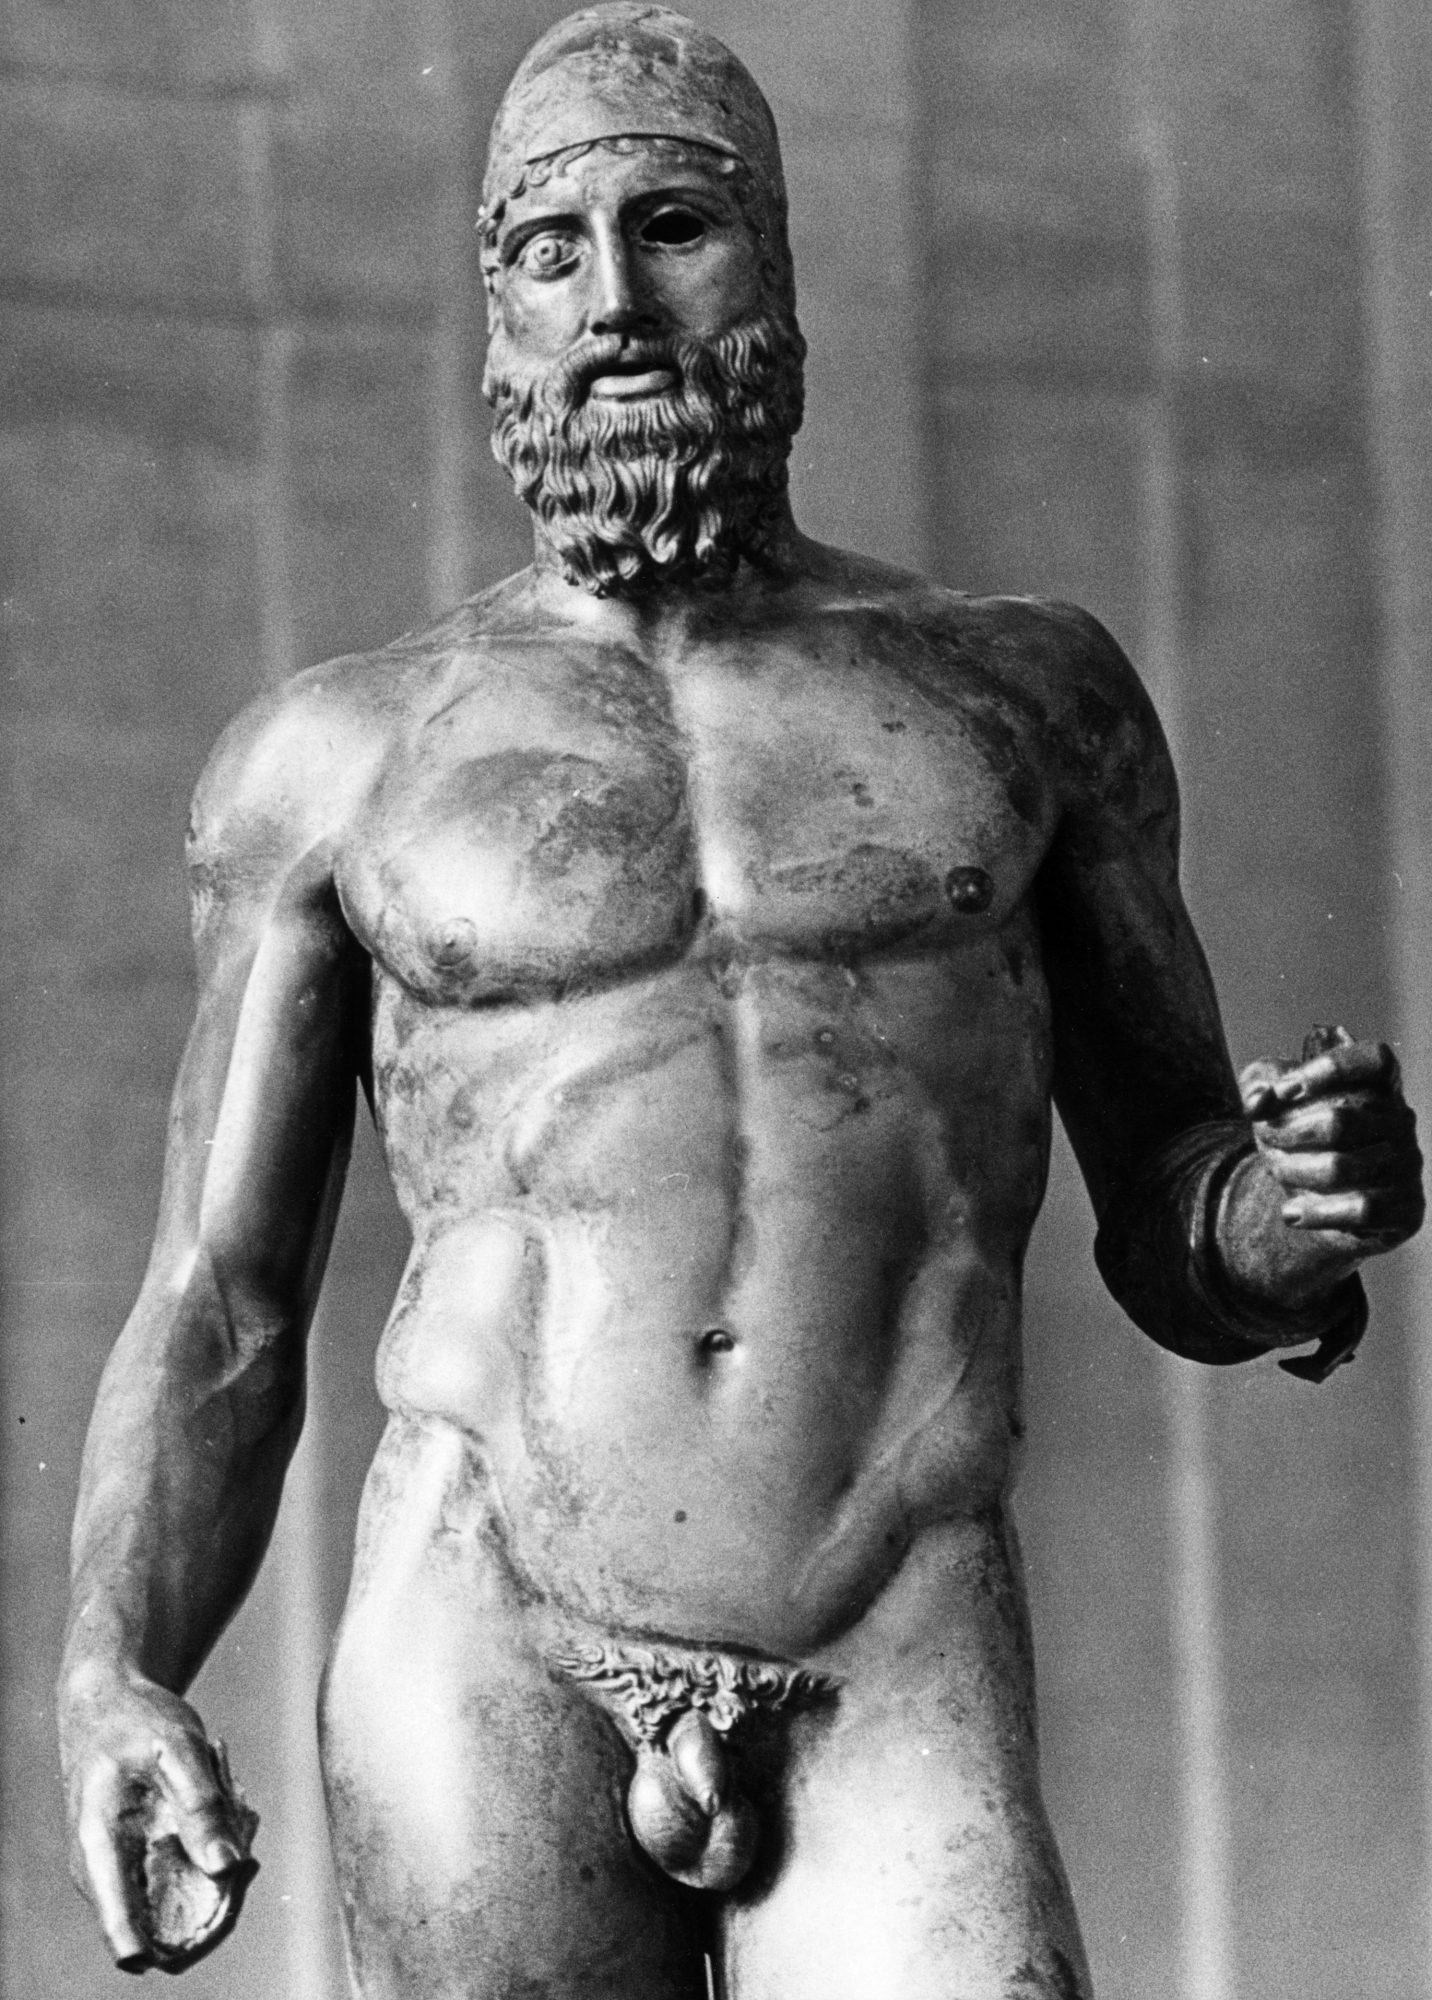 7th July 1981: One of the two bronze statues of Greek warriors found in the sea off Riaci, on display for the first time at the presidential palace in Rome. The magnificent six foot figures are believed to be the work of the 5th century BC Greek sculptor Phidias, designer of the Parthenon. (Photo by Keystone Features/Getty Images)